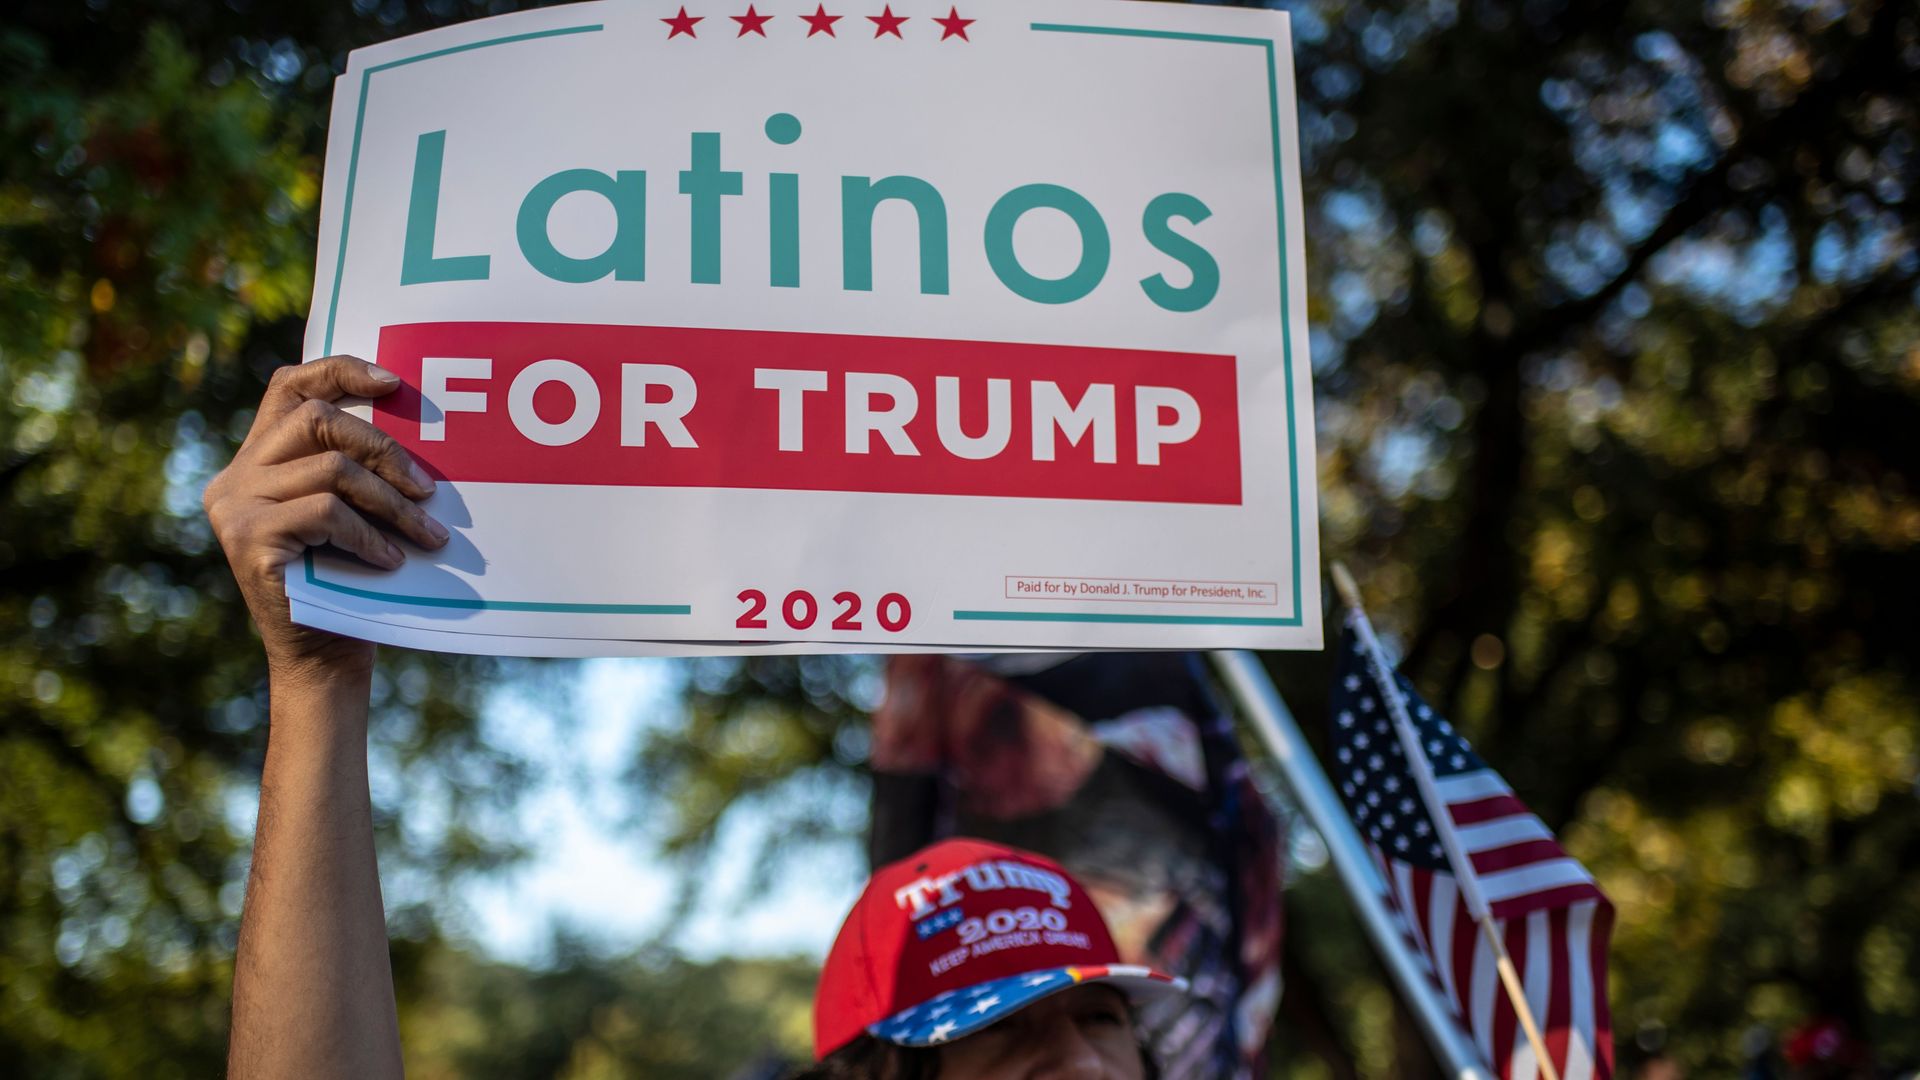 Photo of a person wearing a red Trump 2020 cap and holding up a "Latinos for Trump" sign at an outdoor protest